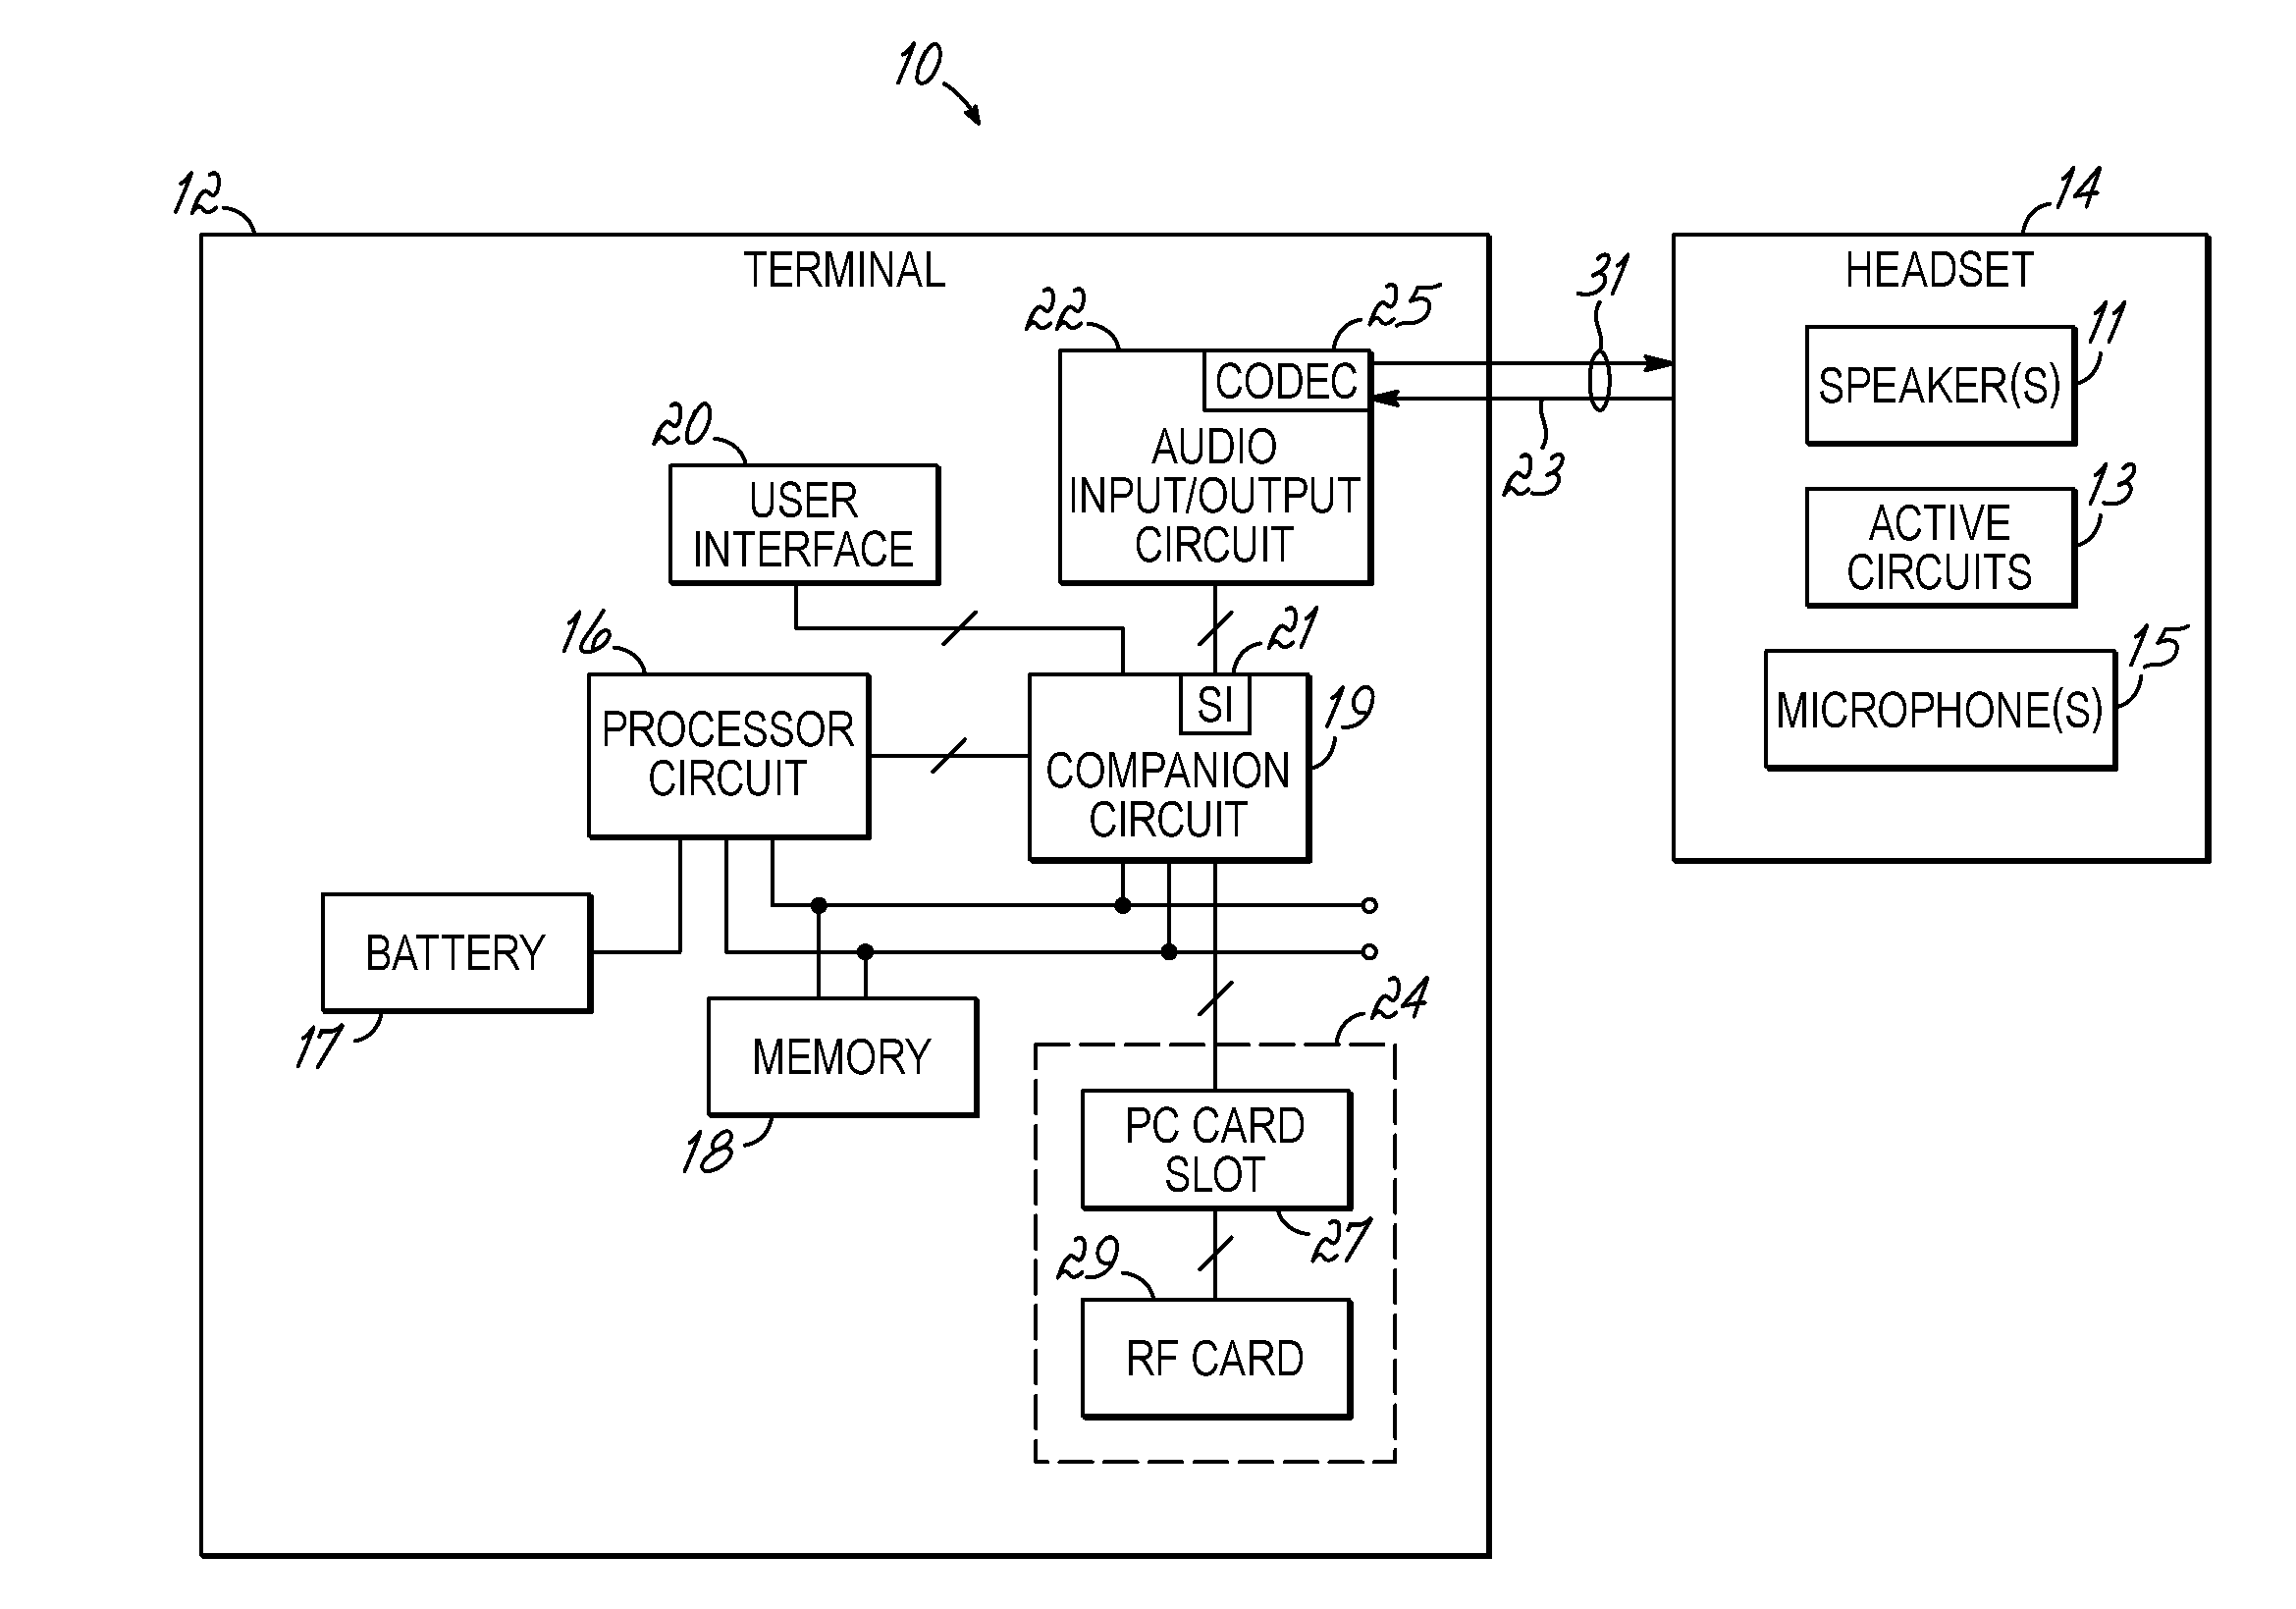 Method and system for power delivery to a headset